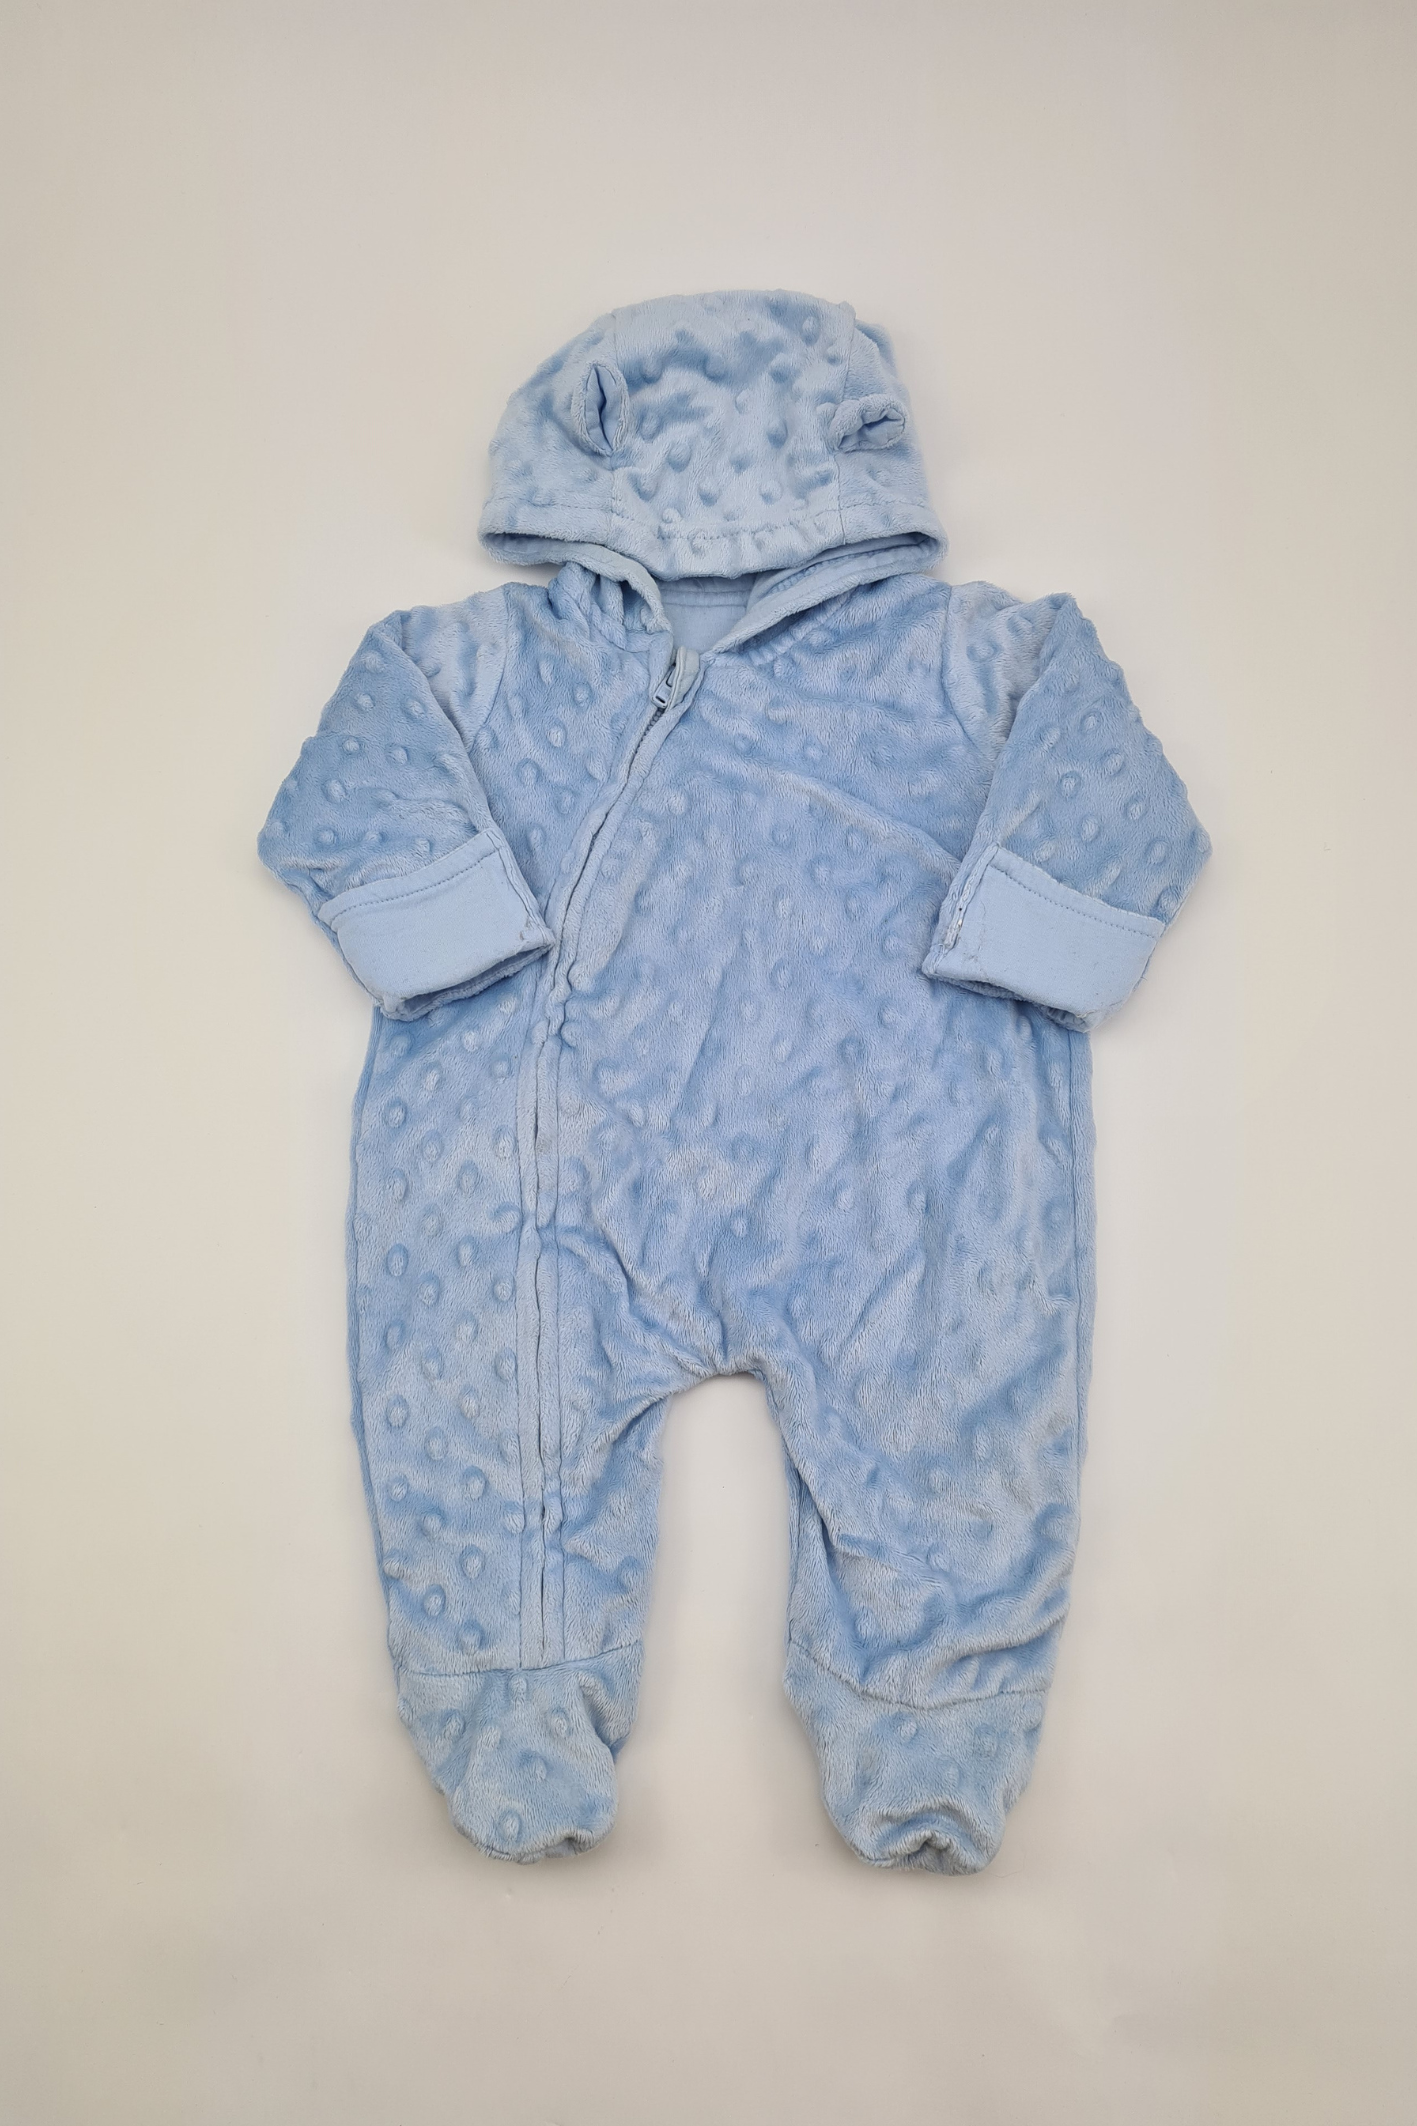 Newborn - 9 lbs All In One Snow Suit (George)